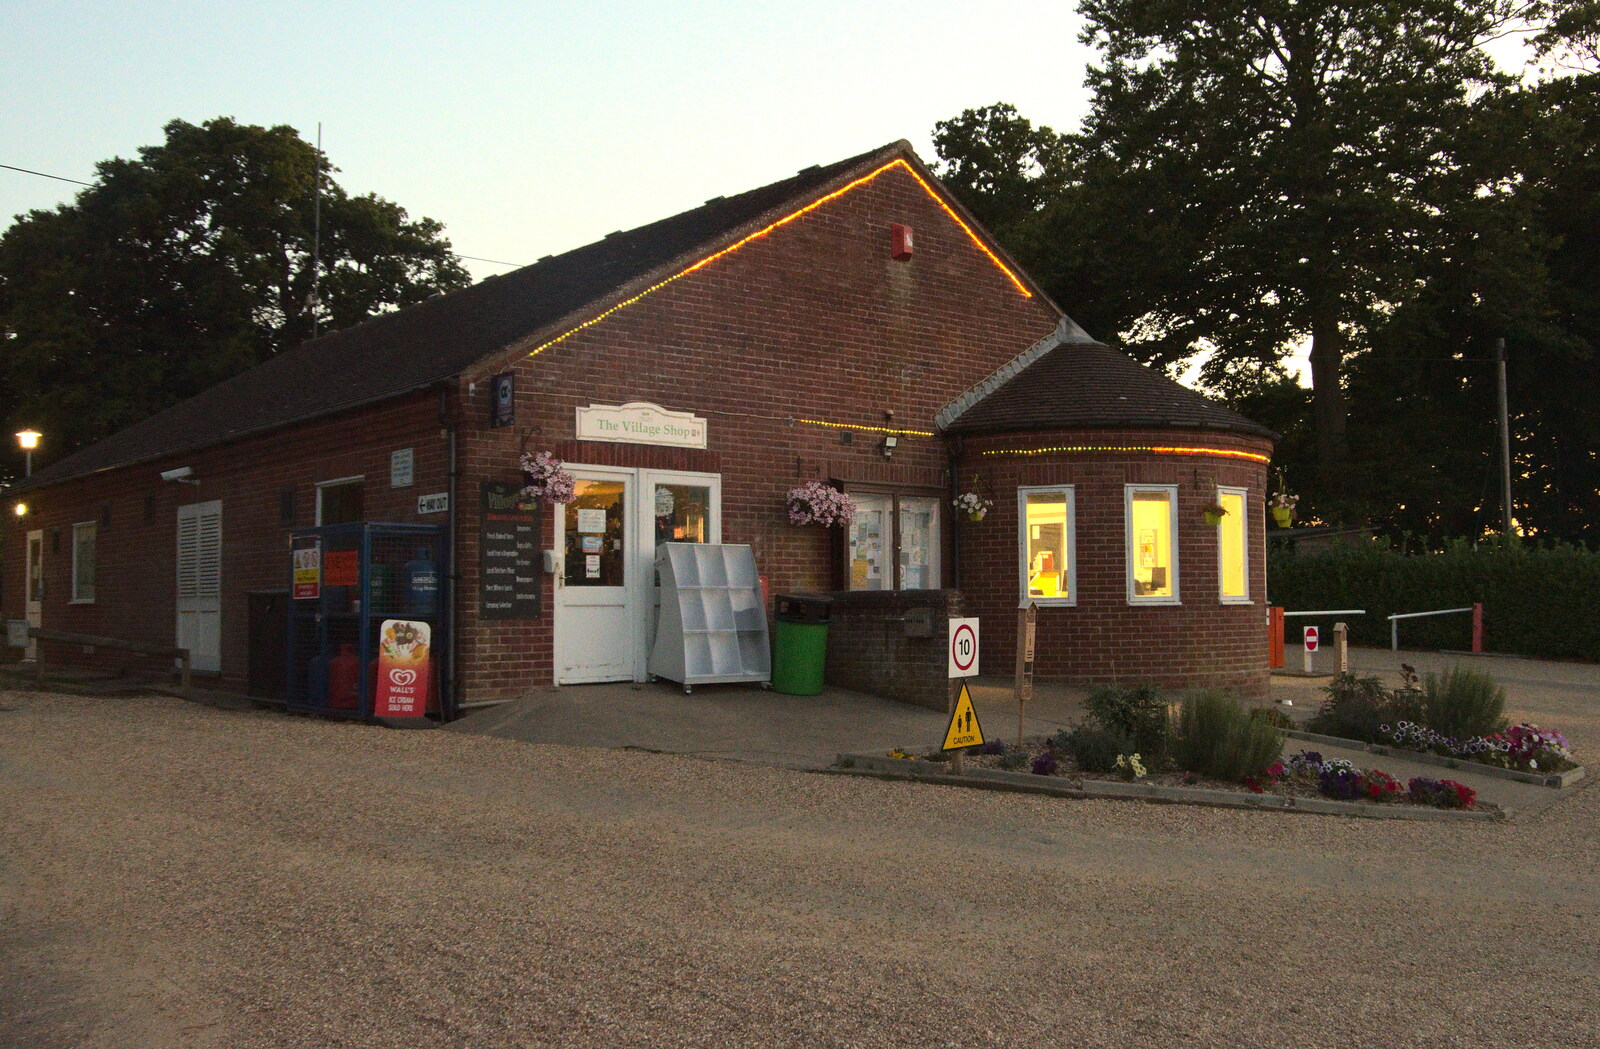 The campsite shop from Camping at Forest Park, Cromer, Norfolk - 12th August 2022